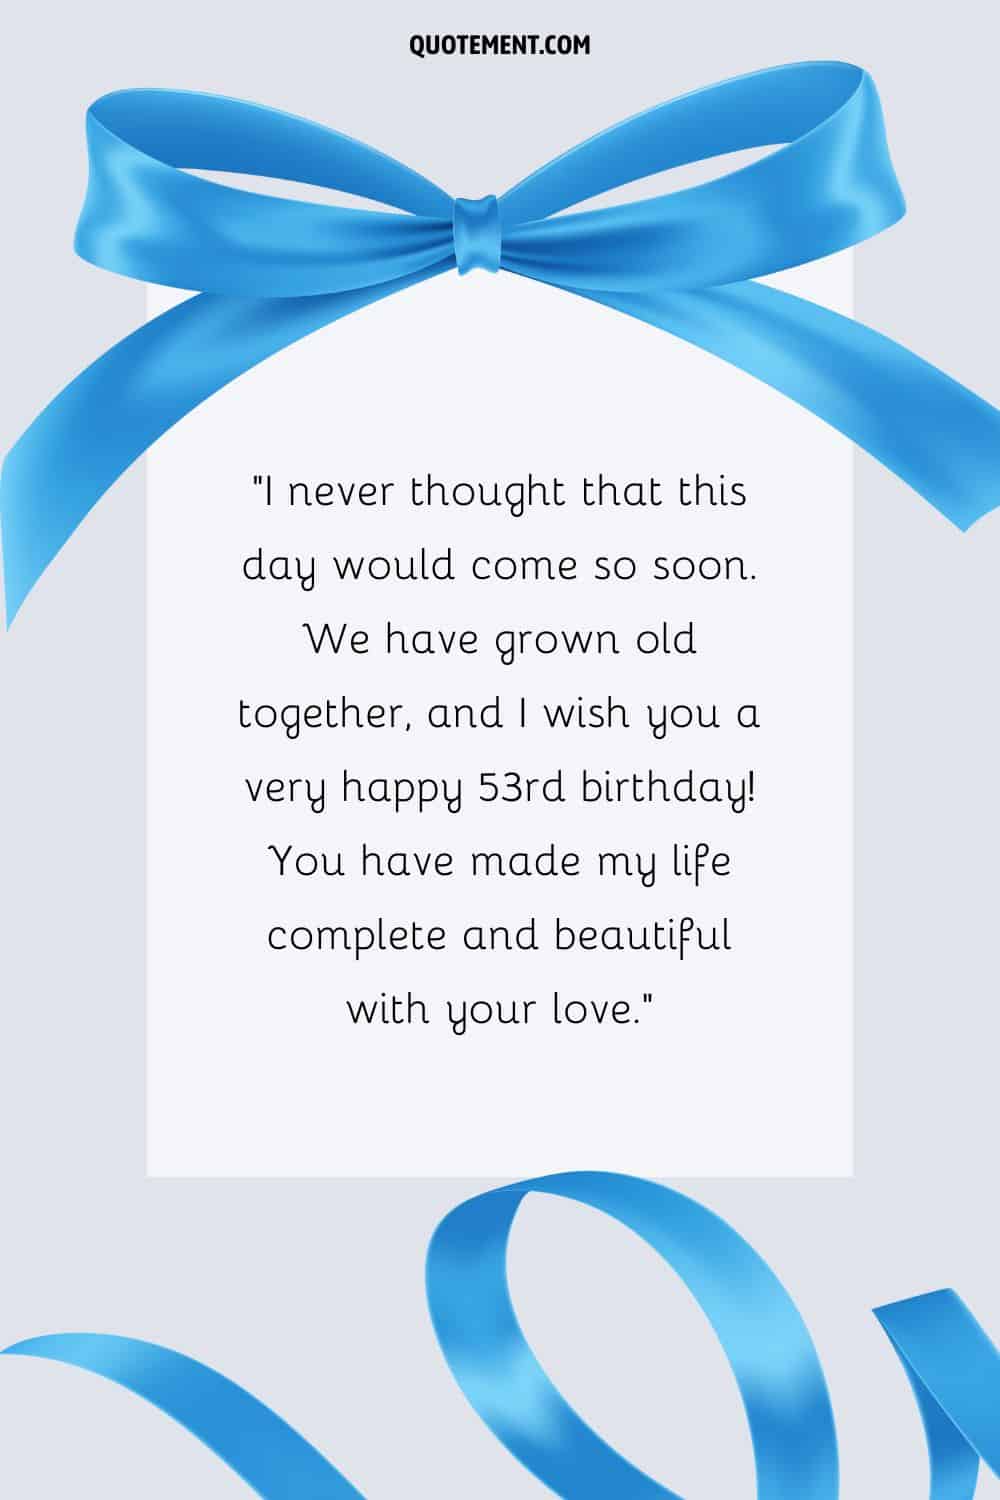 Heartwarming message for a husband's 53rd birthday and a blue ribbon